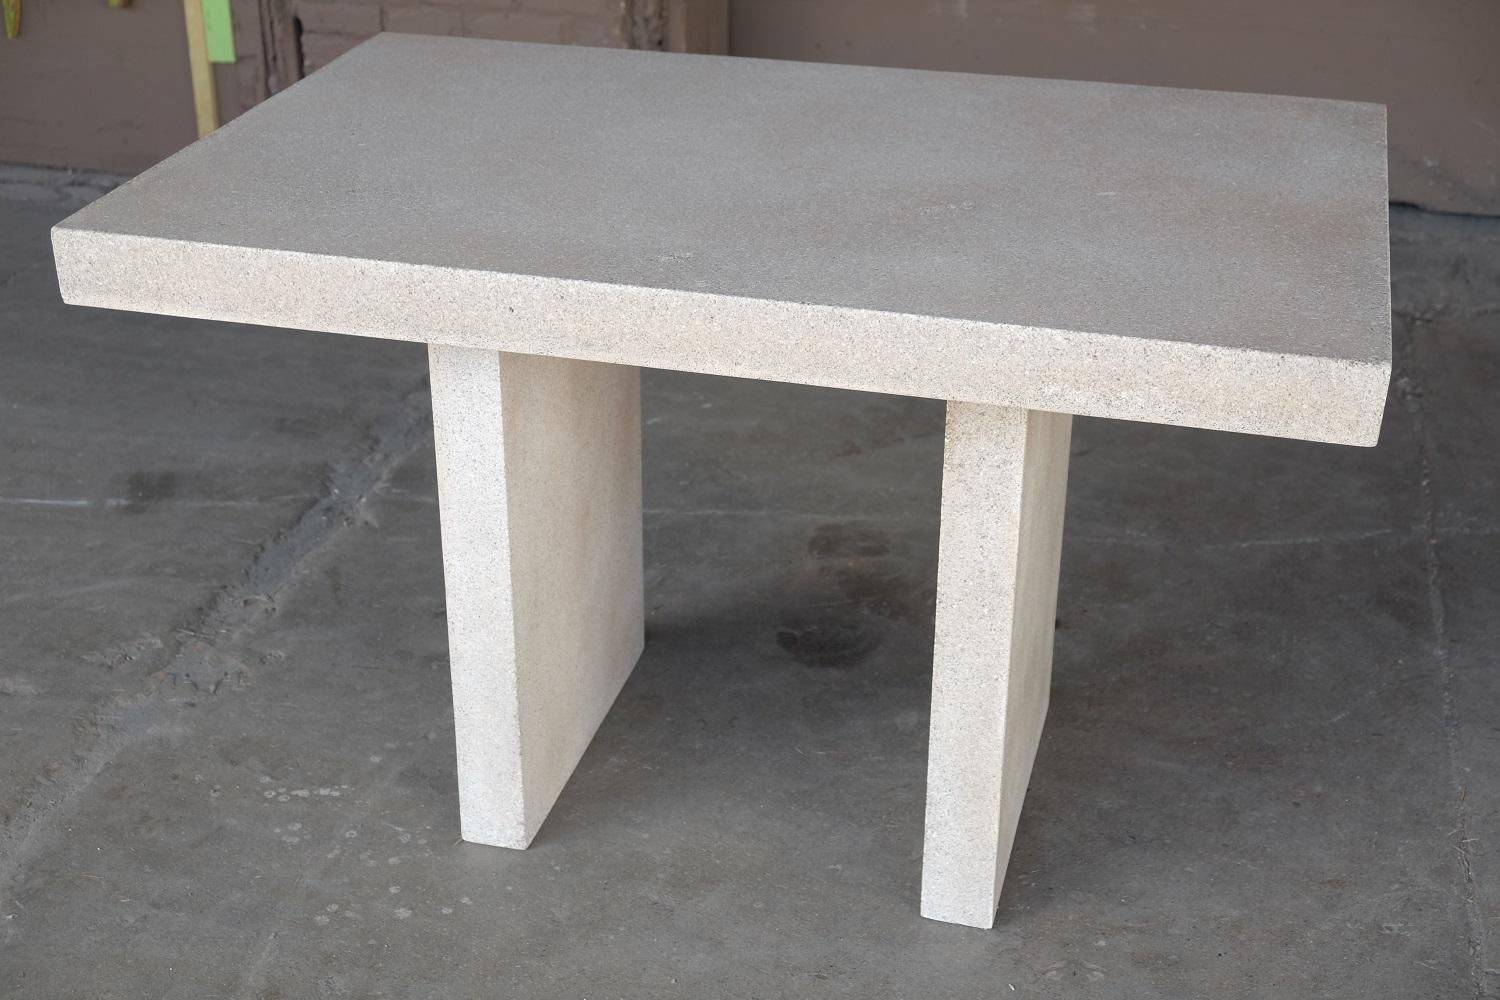 Ledge Dining Table. 

Dimensions: Width 48in. (122 cm), depth 30 in. (76 cm), height 30 in. (76 cm), weight 40 lbs. (18 kg).

Finish color options:
white stone
natural stone
aged stone (shown)
keystone
coal stone

Materials: resin, stone aggregate,